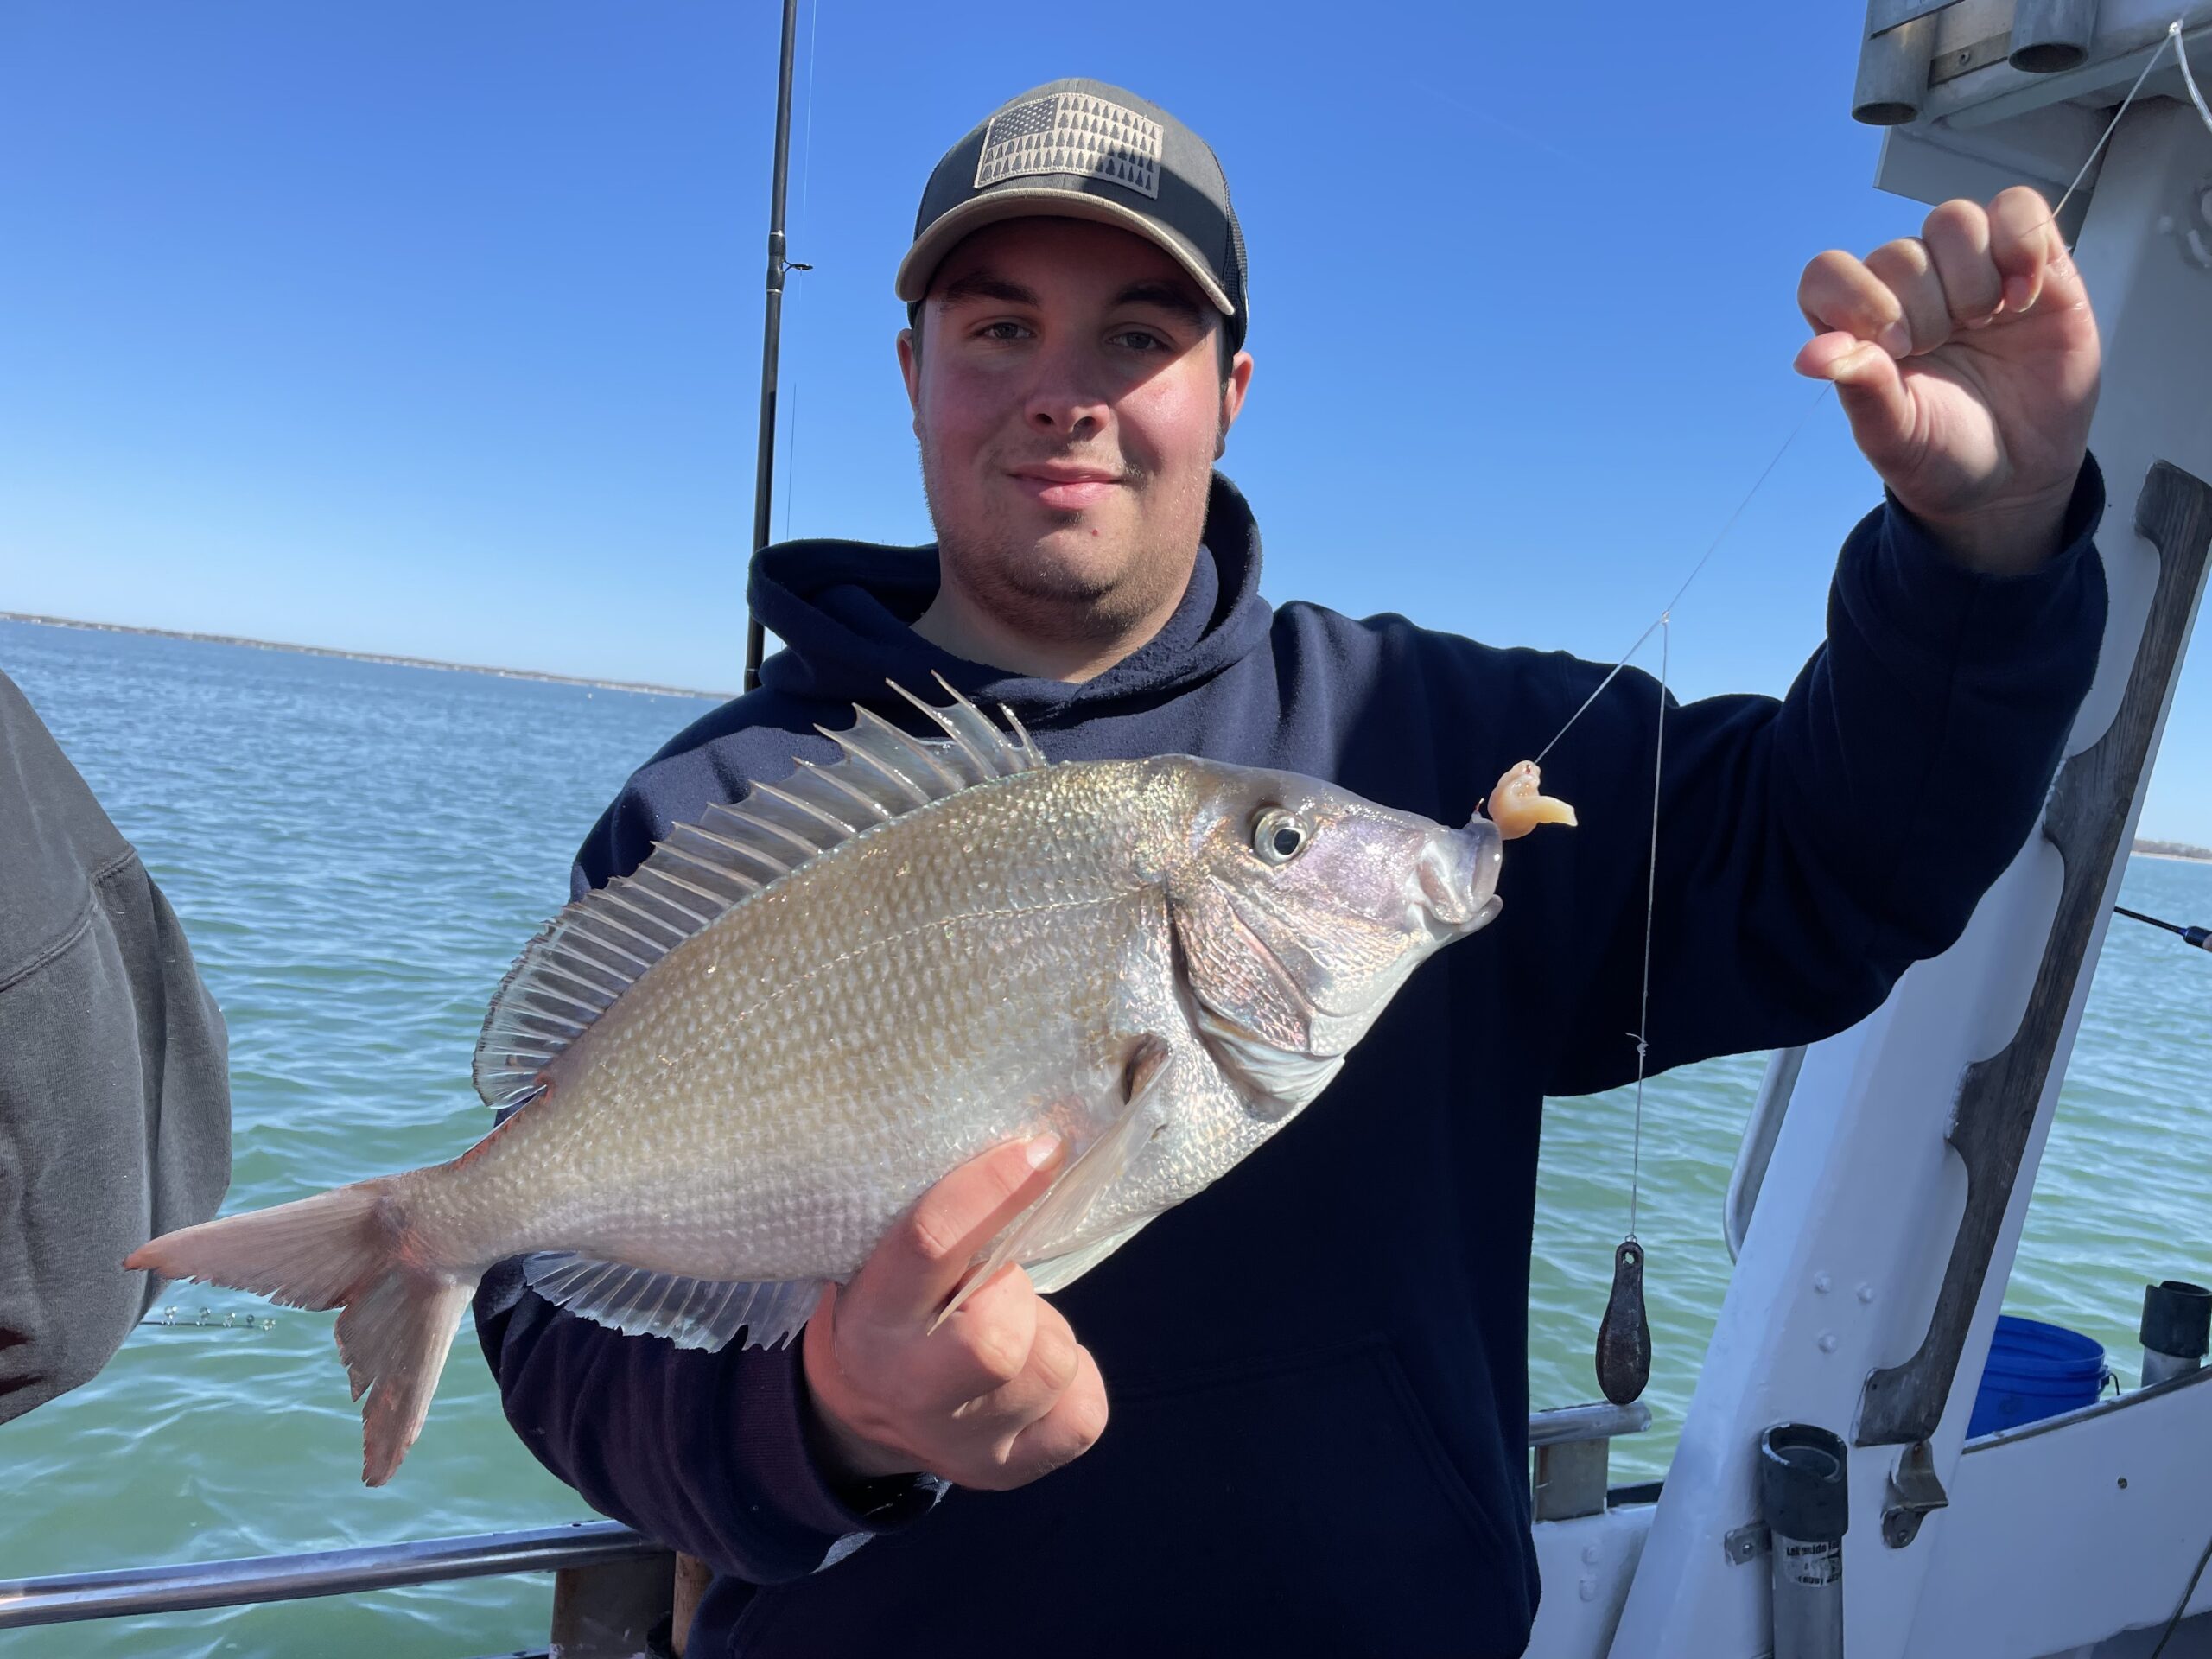 Chris Brenner Jr. with a 3-pound, 6-ounce porgy caught aboard the Shinnecock Star in Peconic Bay.